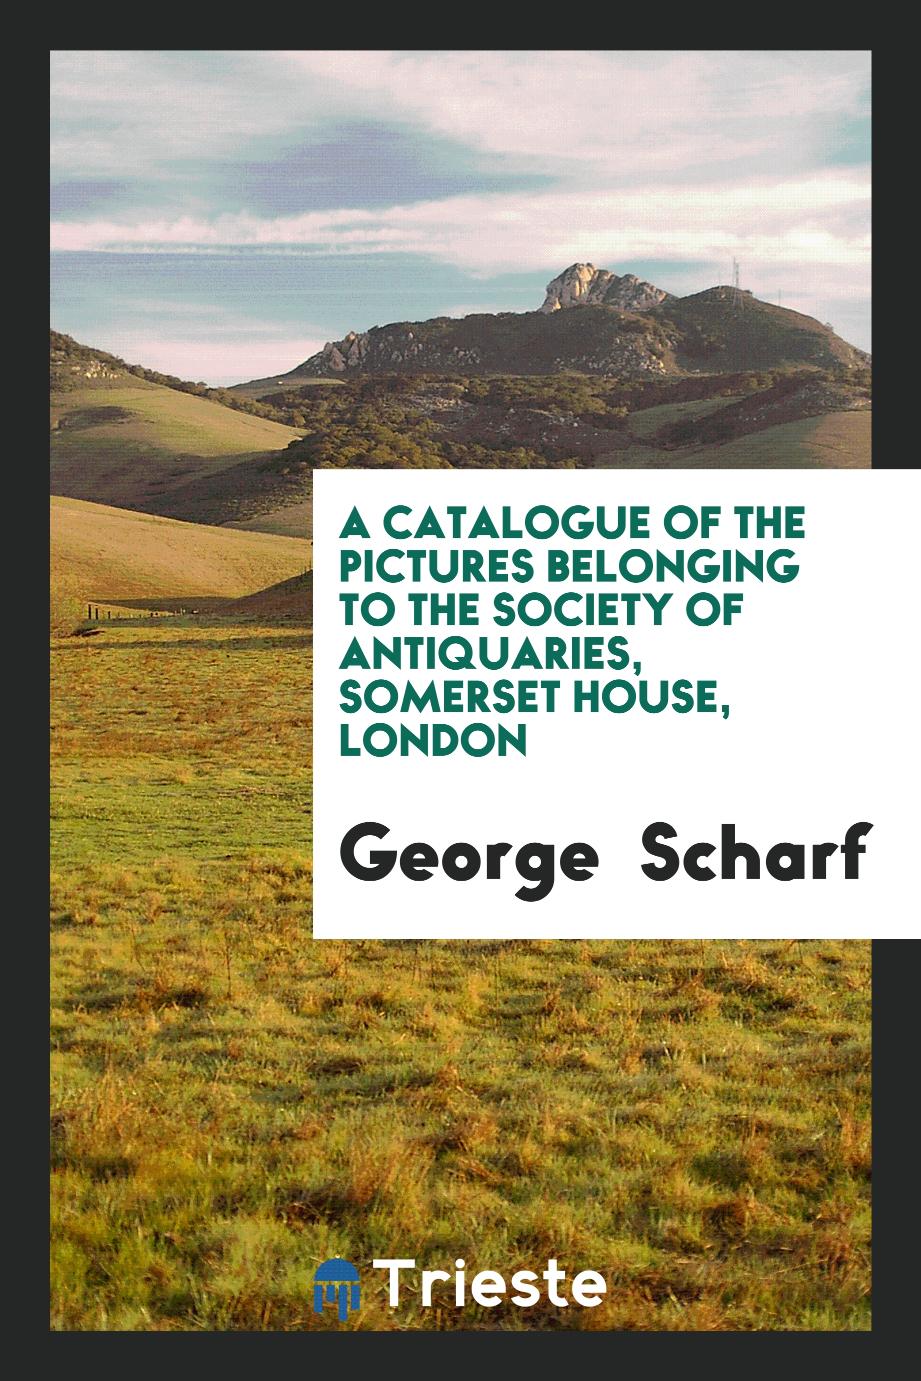 A Catalogue of the Pictures Belonging to the Society of Antiquaries, somerset house, London